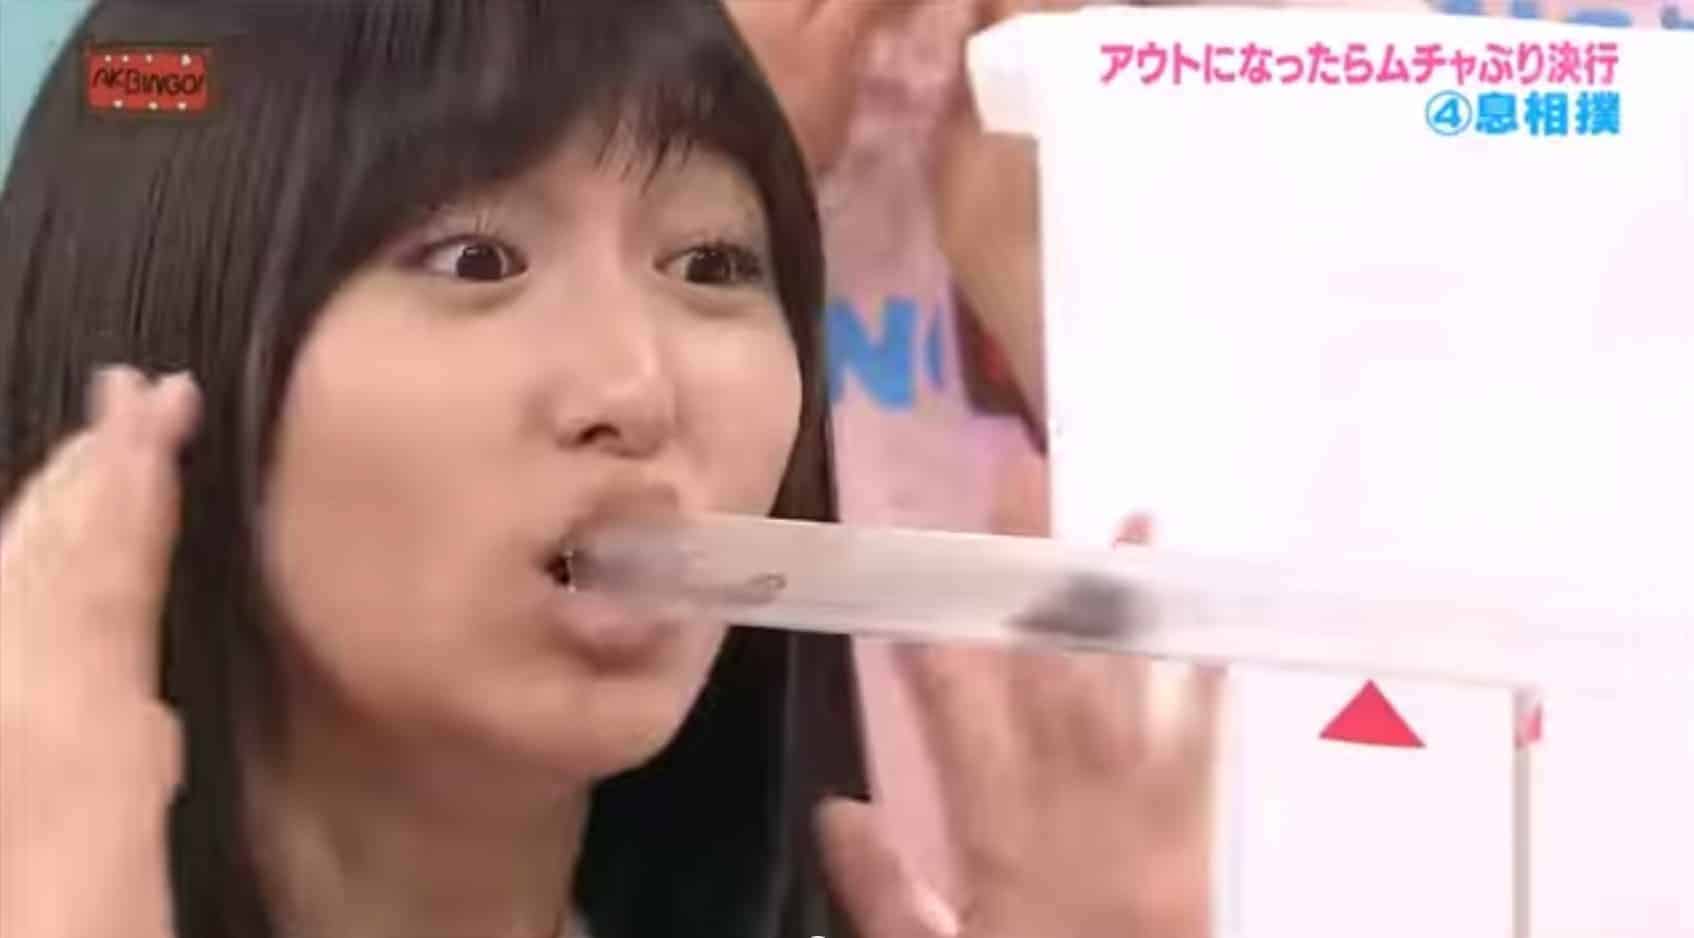 A woman is holding a plastic tube in her mouth while watching a cockroach.